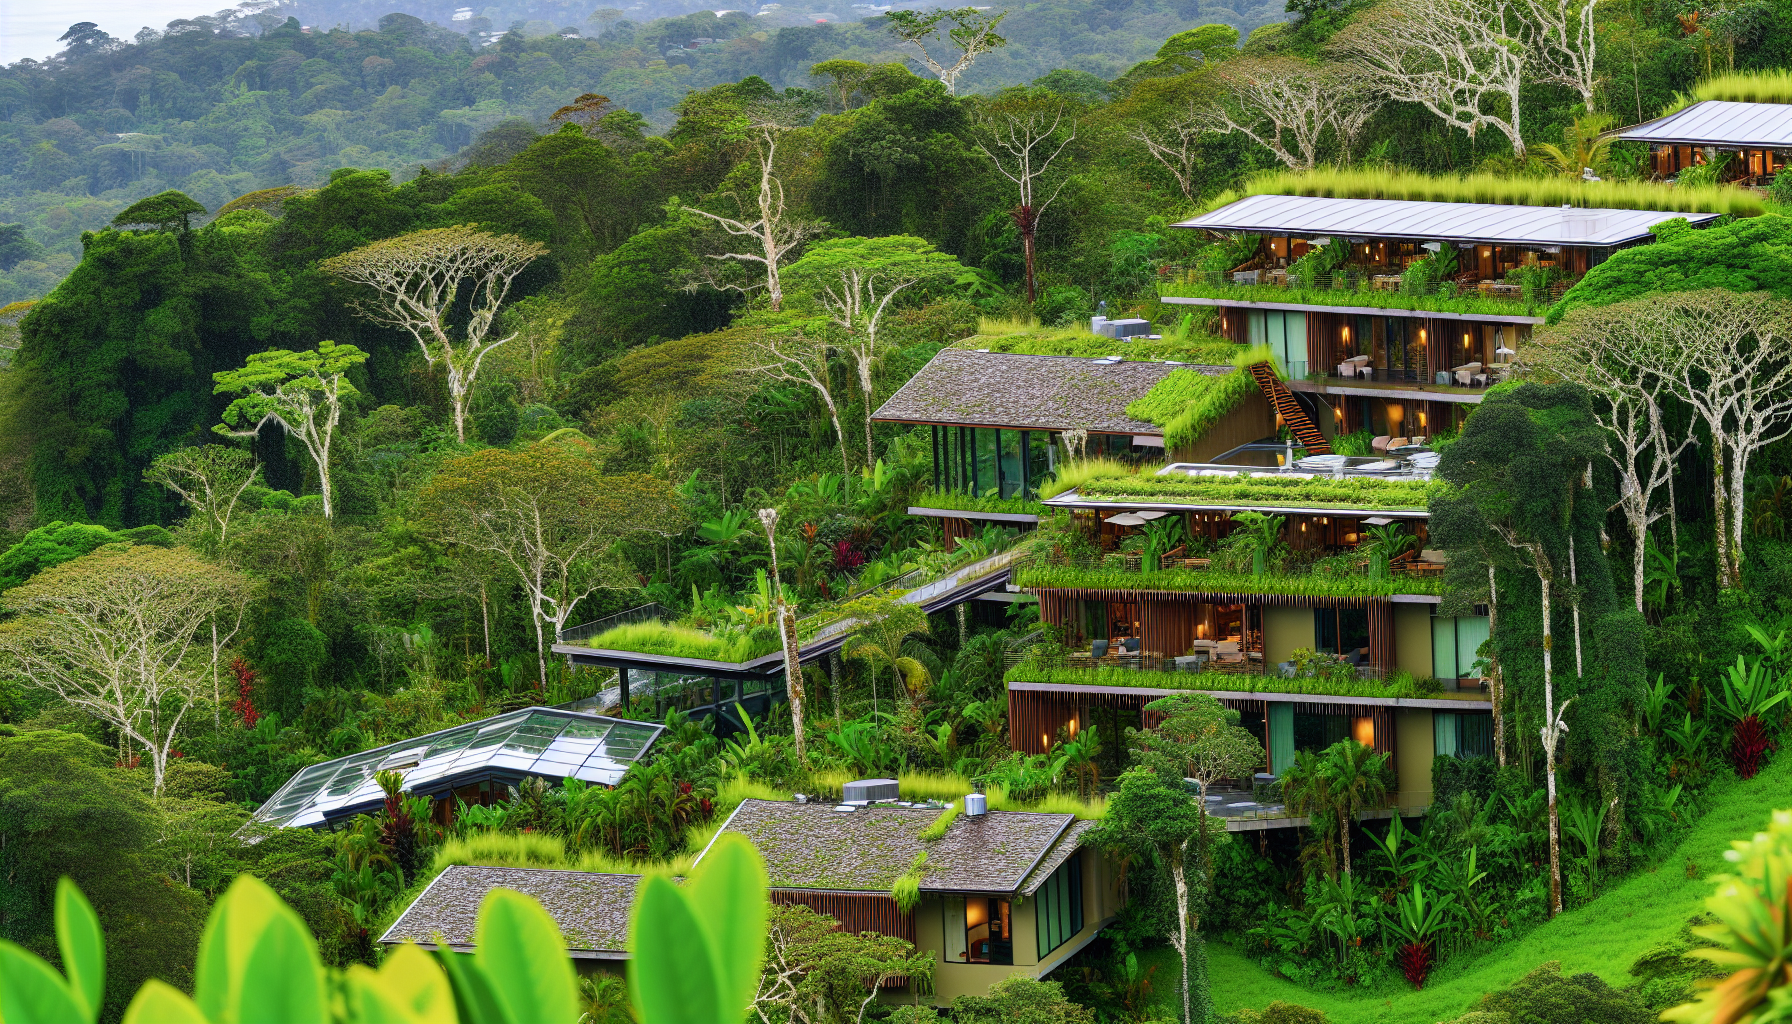 Sustainable eco-friendly hotel surrounded by nature